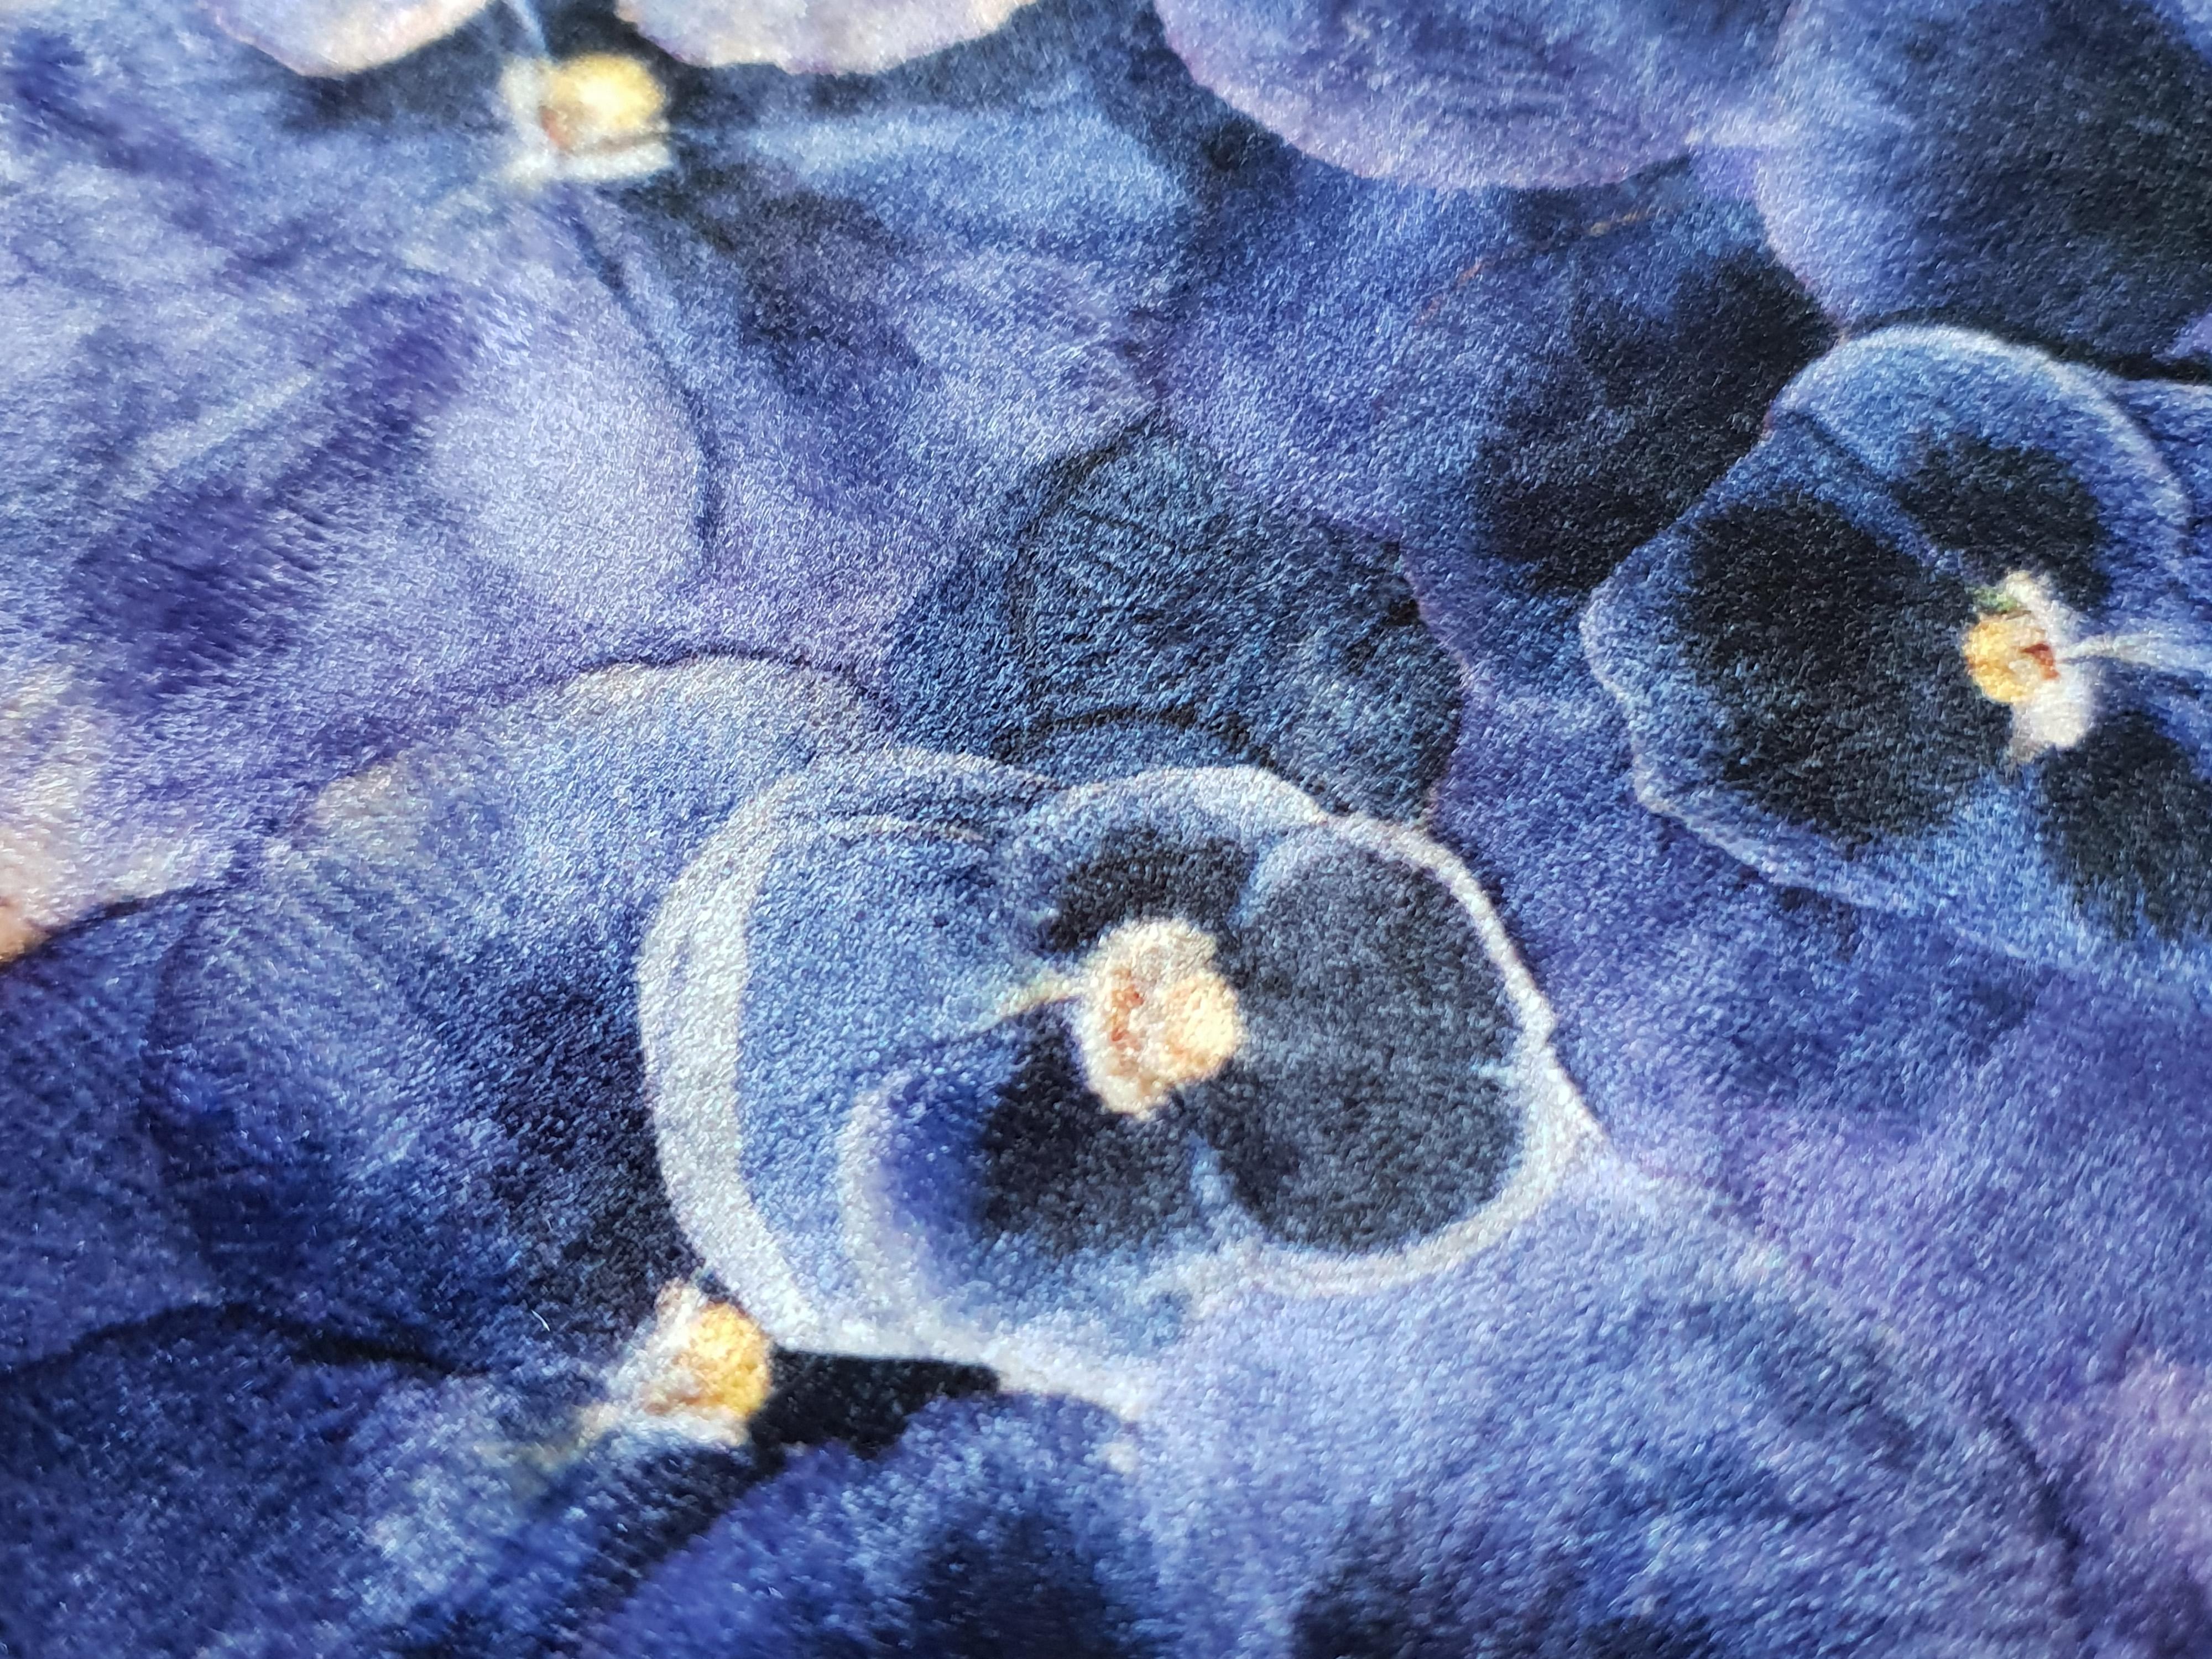 BLUE VIOLETS
Material: Soft Velvet ,100% Polyester
Size 50-50 CM  19-19 INCH

EST-1966 by Chantal Keizer brings a series of luxurious wallpaper, fabrics, cushions in several sizes & kitchen textiles. Detailed designs, inspired by the richness of